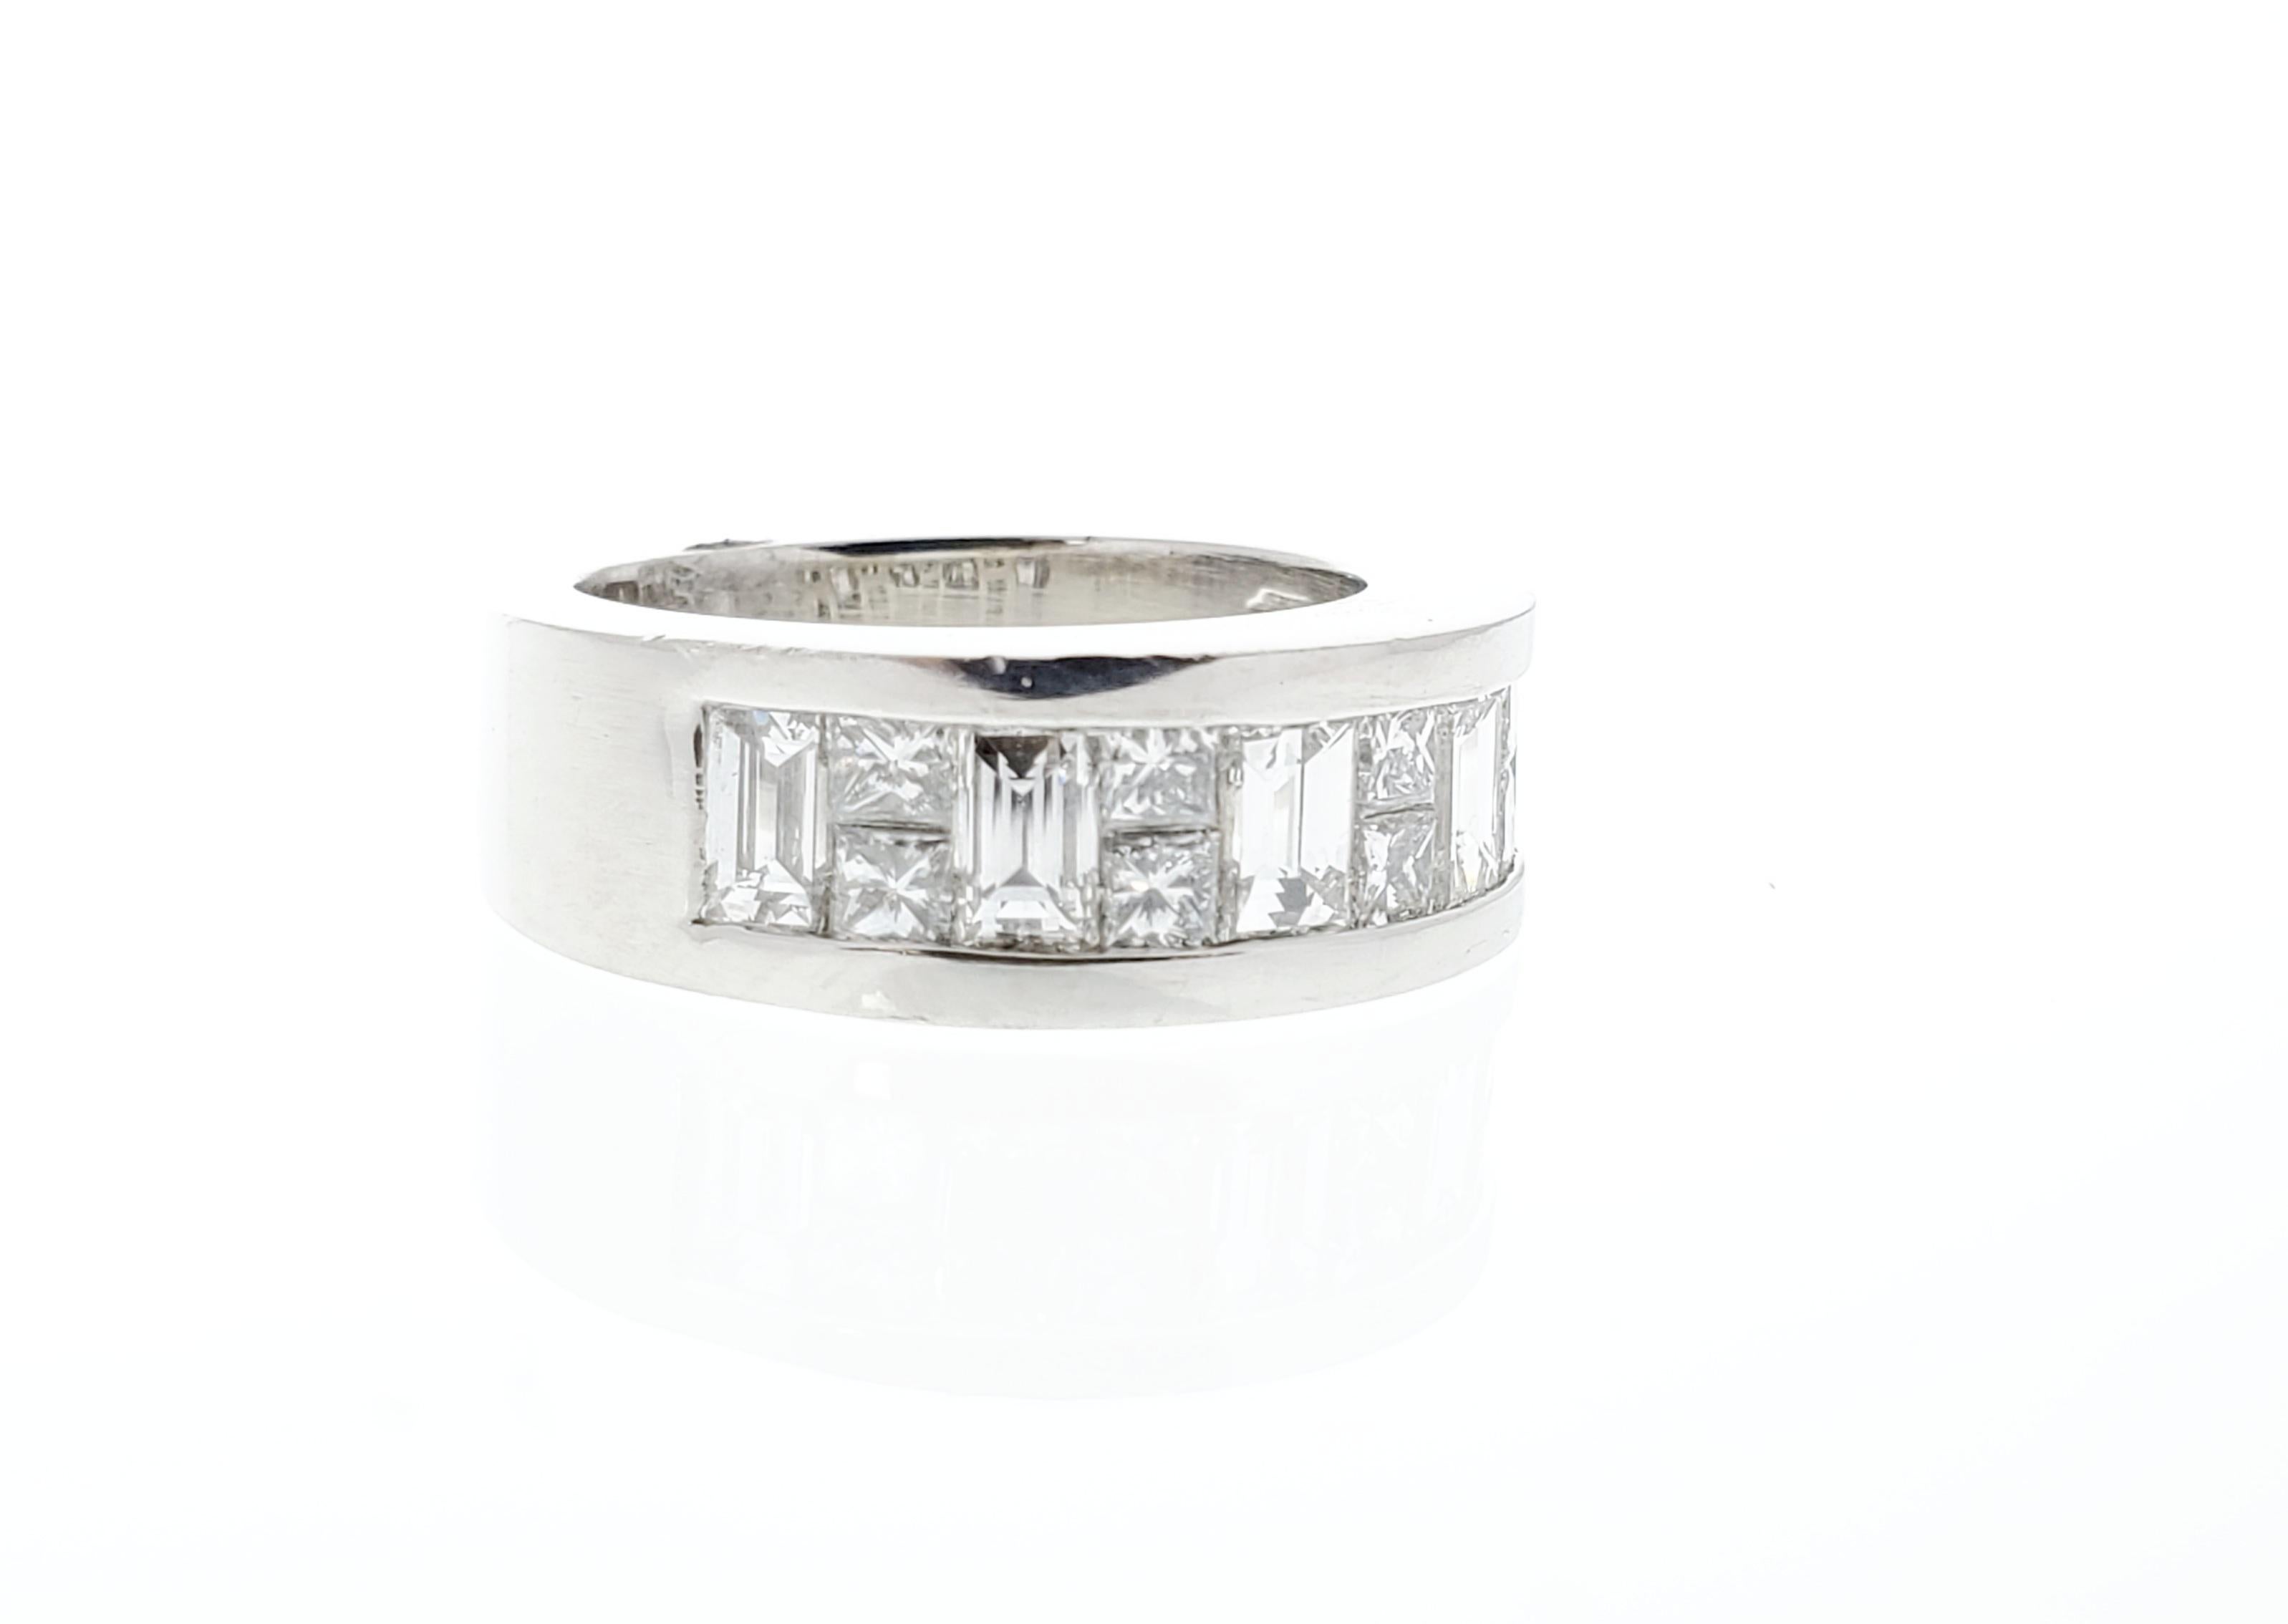 This brightly polished platinum ring exudes an ultimate style and prestige with its incredible sparkle and fire. A total of 2.27 carats of princess and baguette cut diamonds are arranged in a stunning setting, allowing maximum fire and scintillation